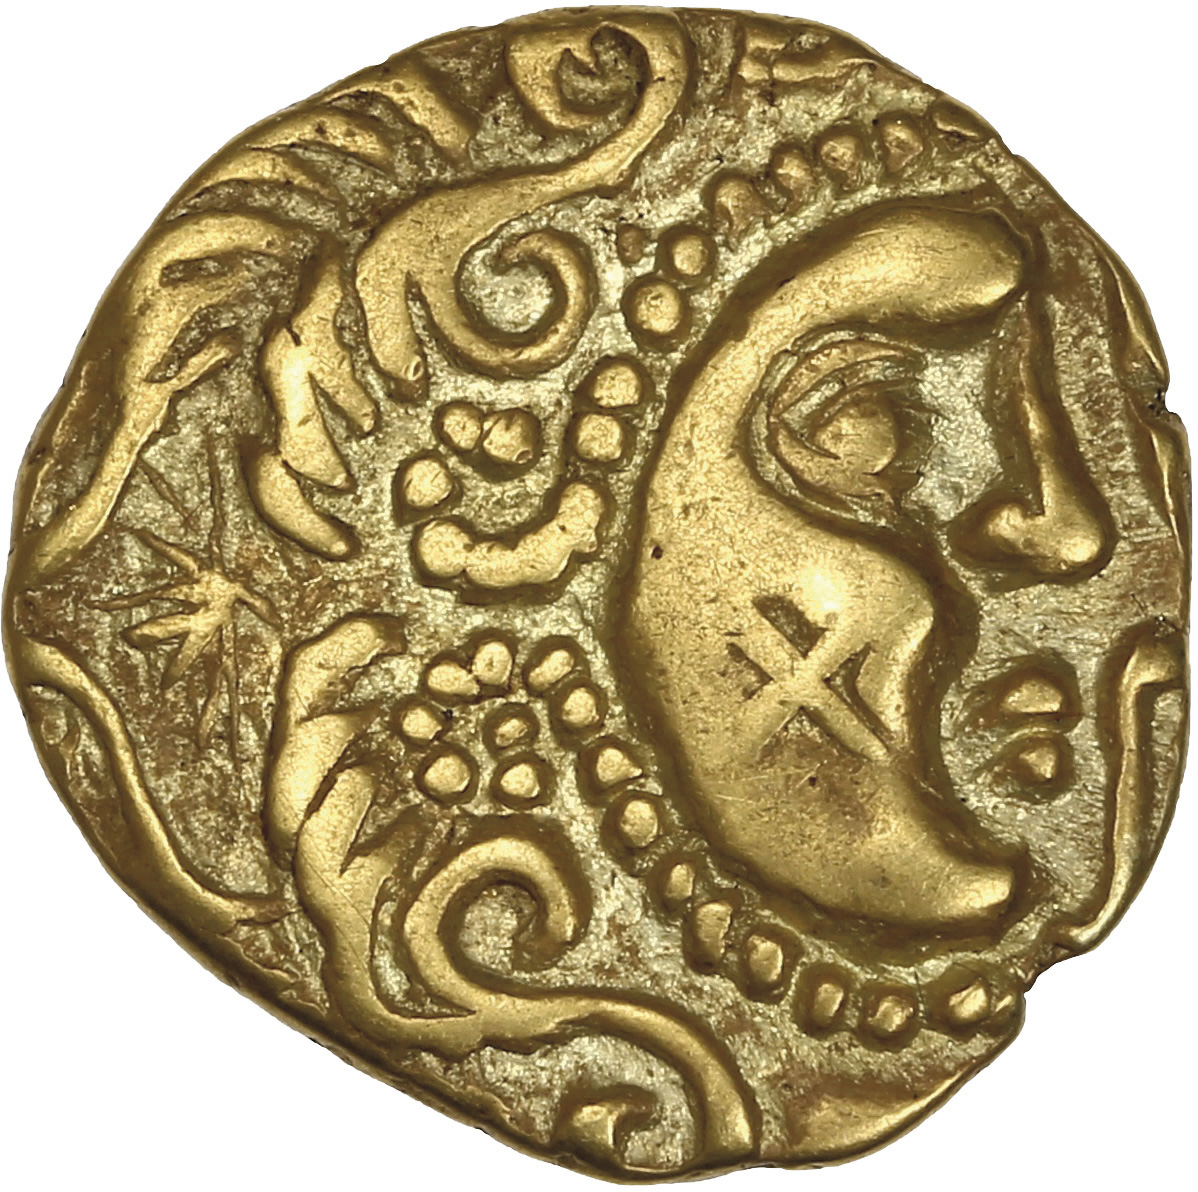 The Parisii Stater: The Golden Age of Gallic Coins